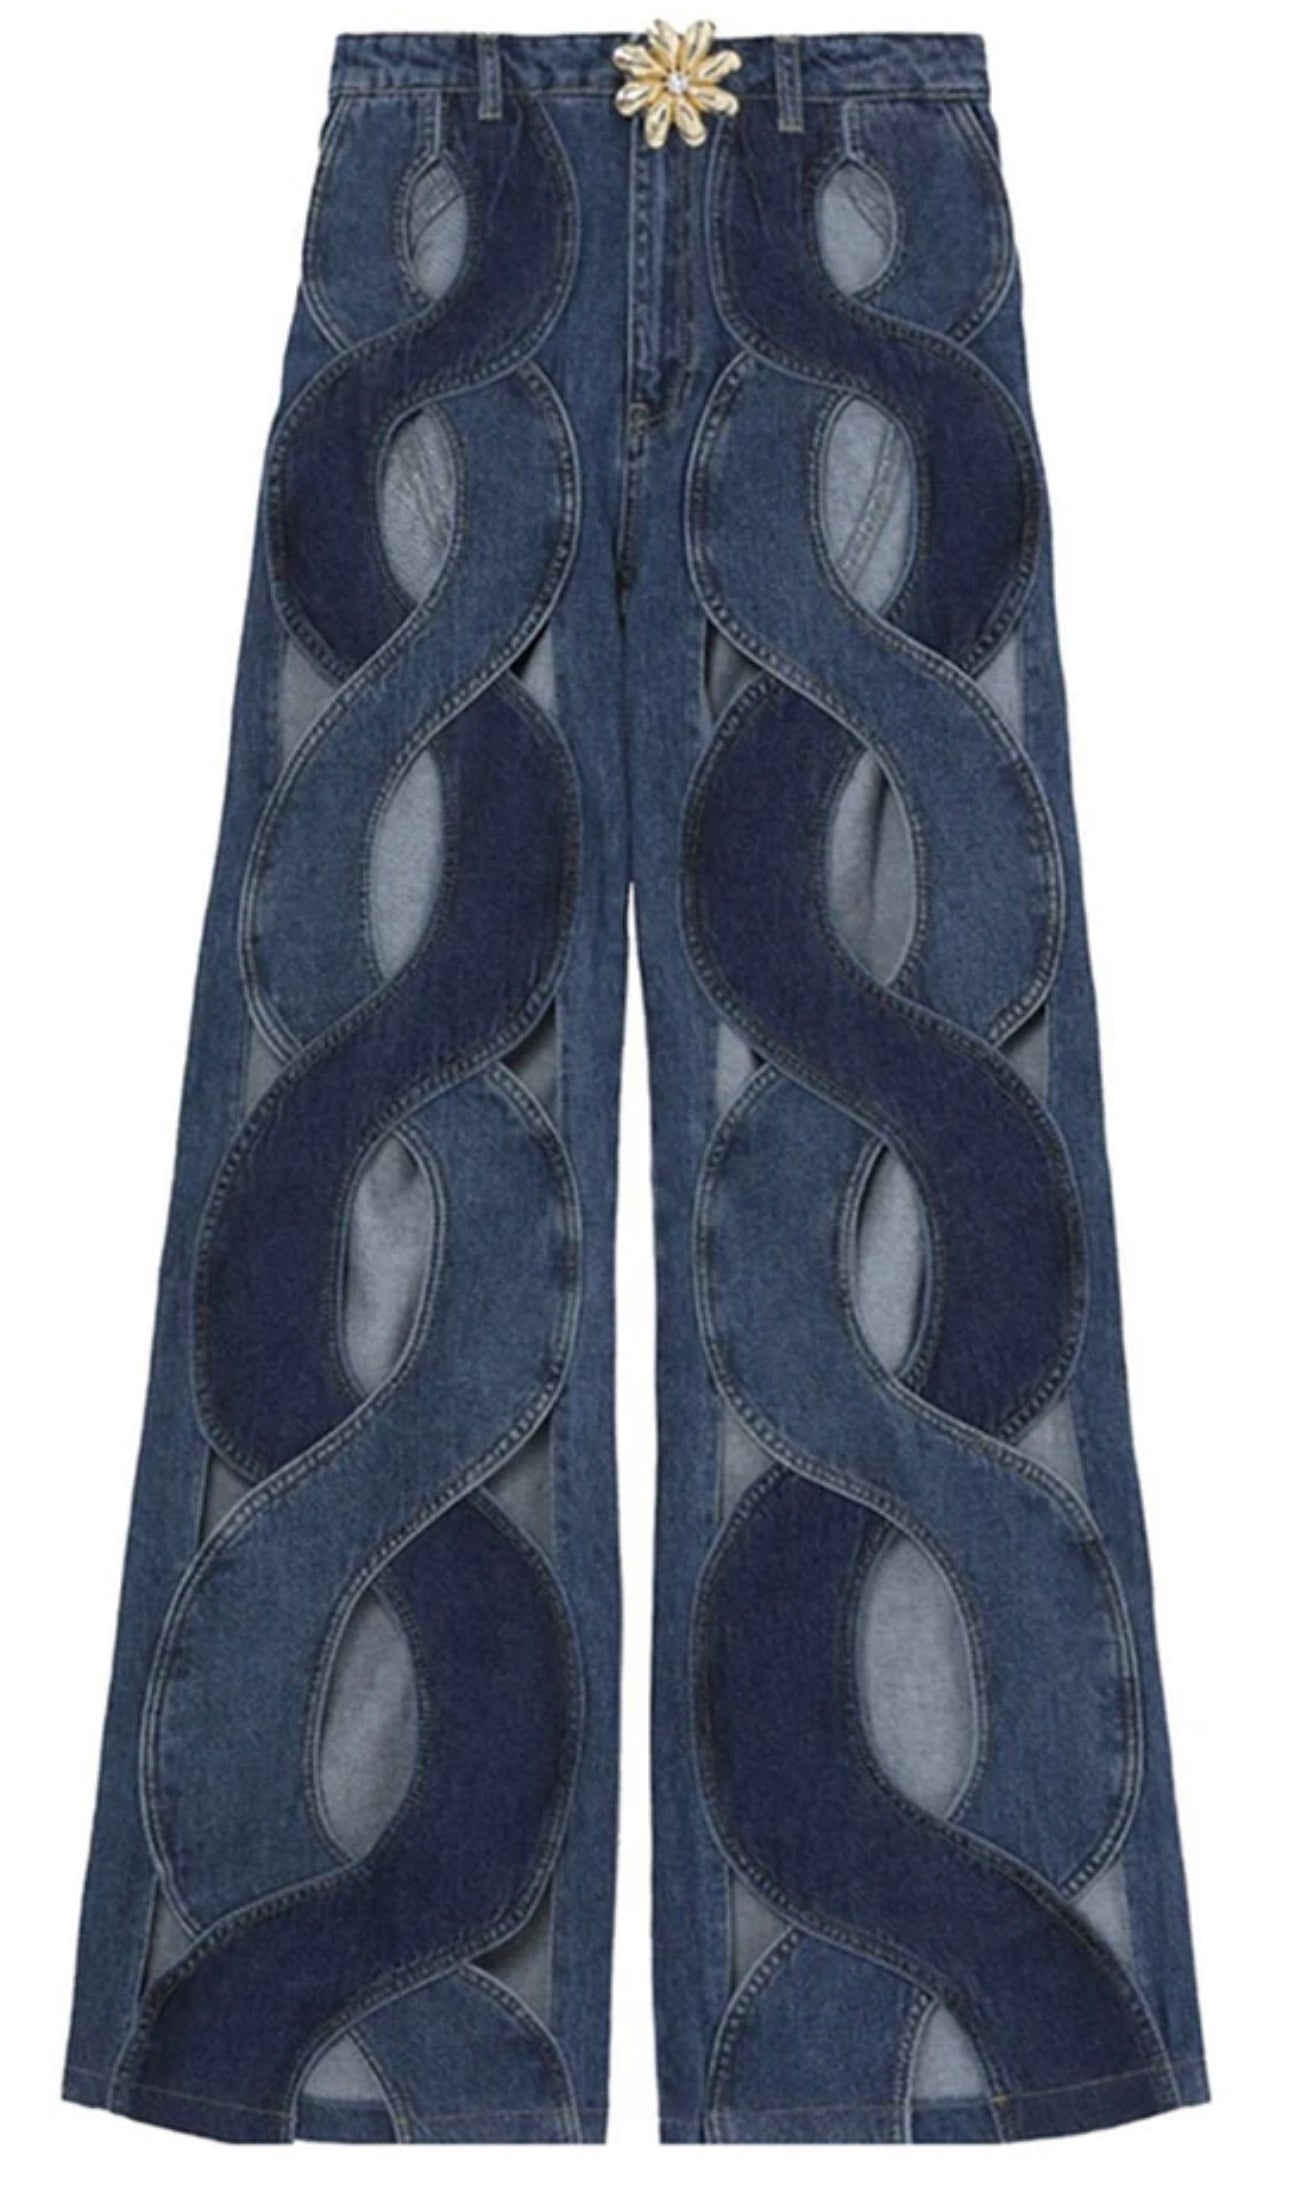 Twisted Chic Cutout Denim Jeans